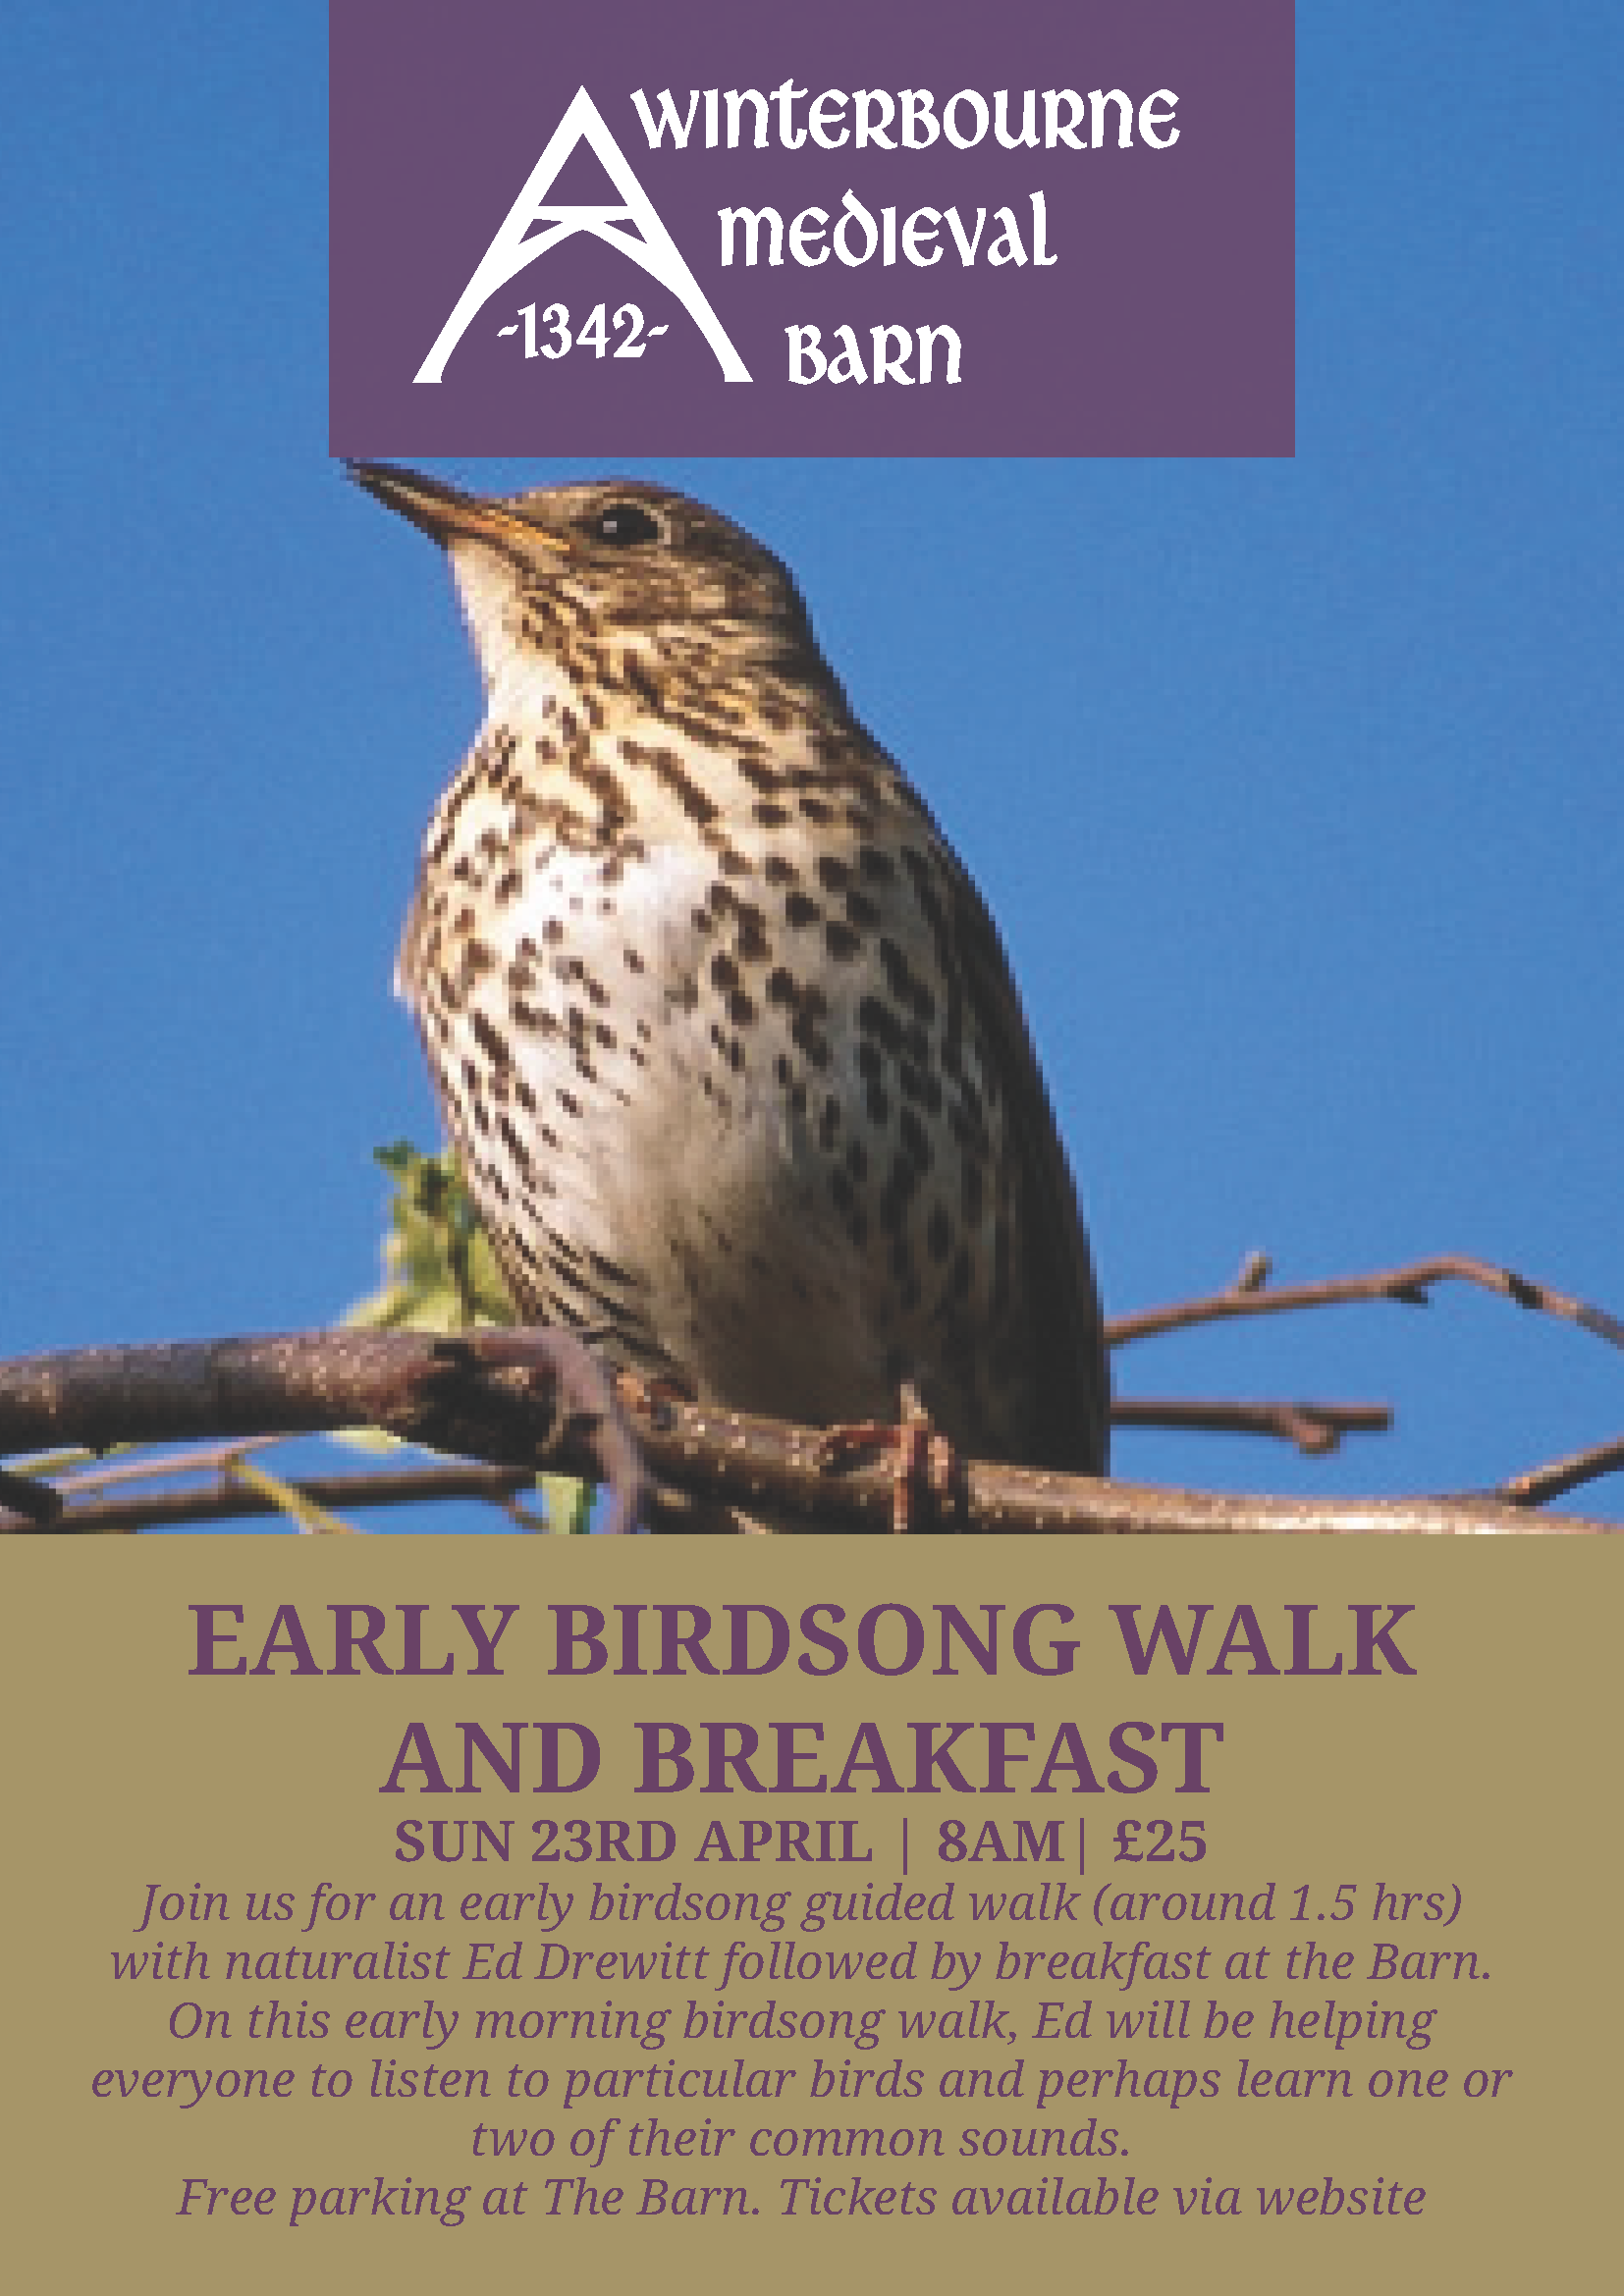 Winterbourne Medieval Barn. EARLY BIRDSONG WALK AND BREAKFAST SUN 23RD APRIL | 8AM| £25 Join us for an early birdsong guided walk (around 1.5 hrs) with naturalist Ed Drewitt followed by breakfast at the Barn. On this early morning birdsong walk, Ed will be helping everyone to listen to particular birds and perhaps learn one or two of their common sounds. Free parking at The Barn. Tickets available via website.